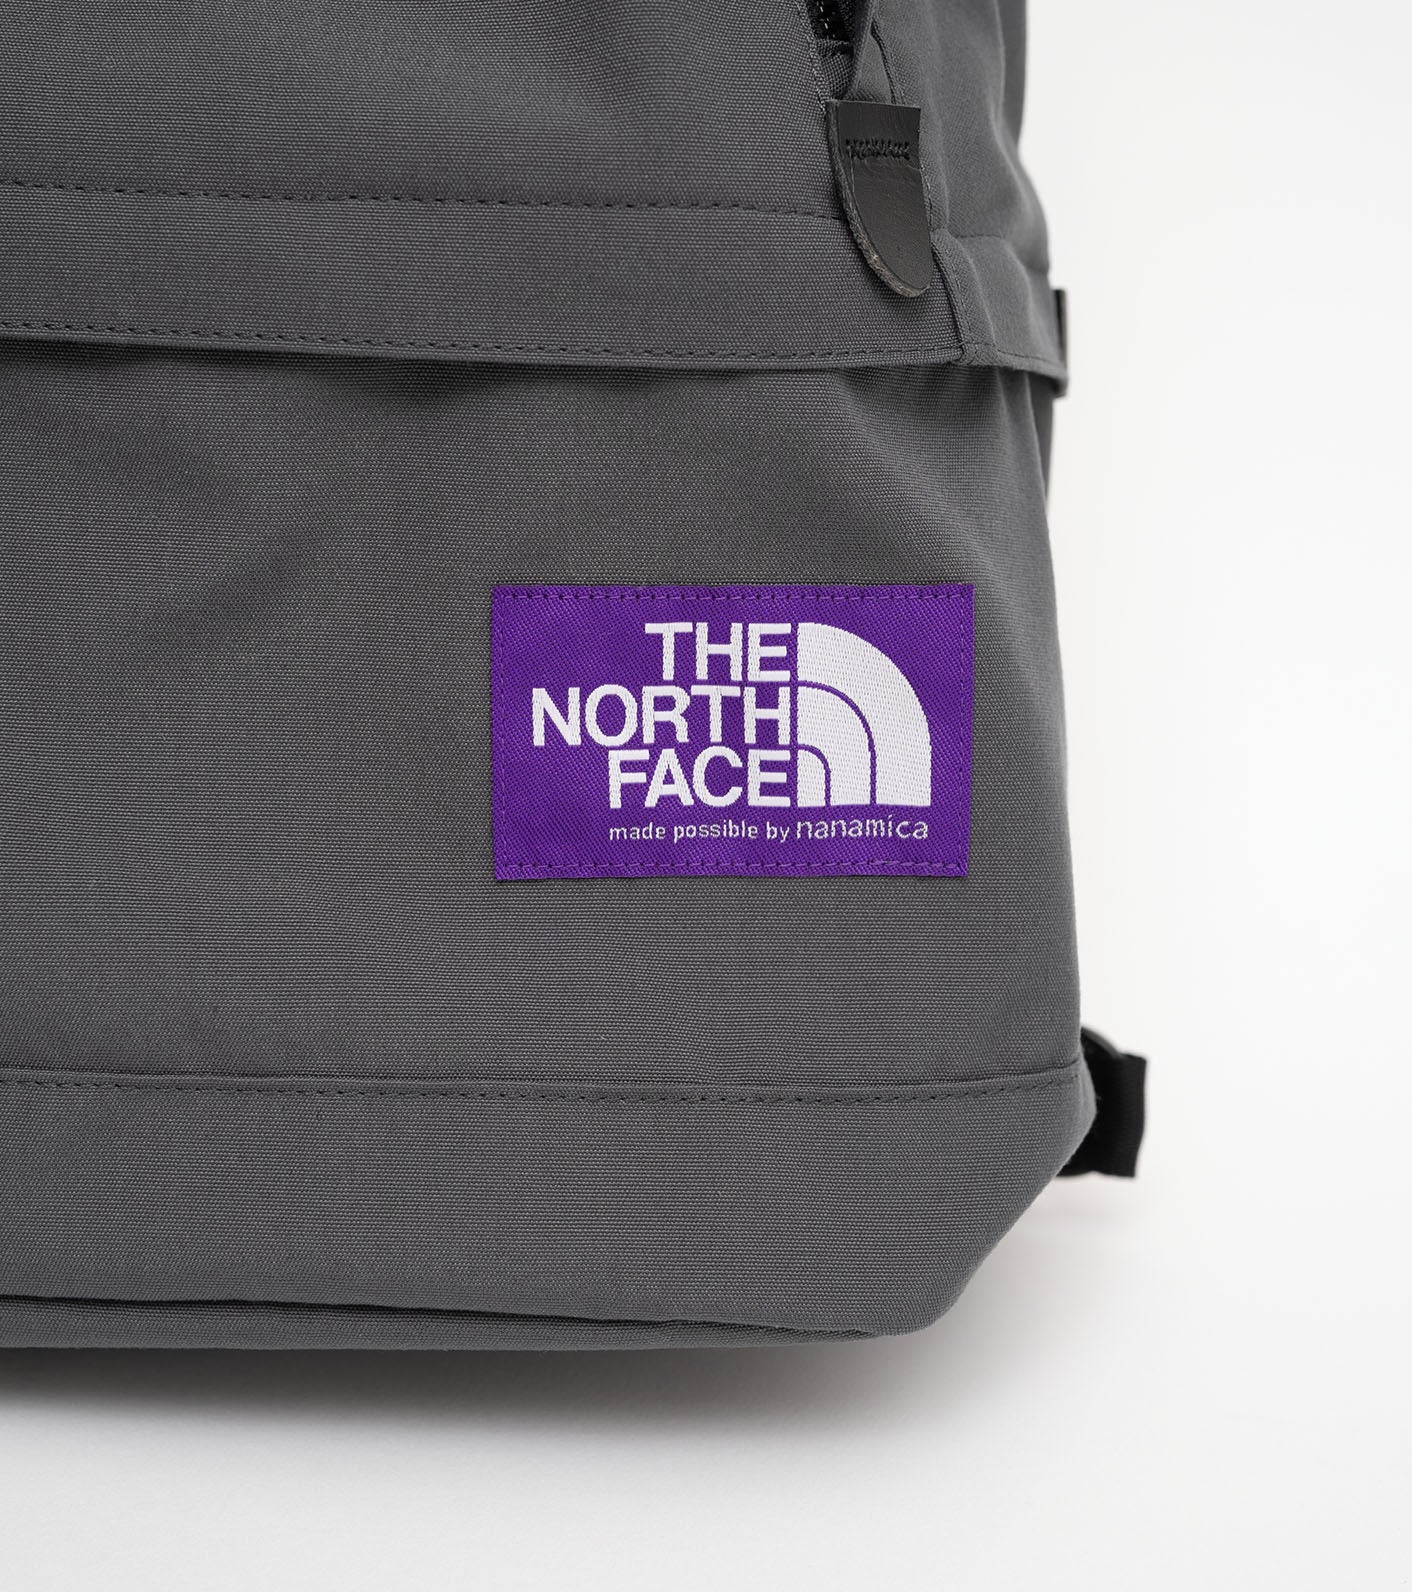 THE NORTH FACE PURPLE LABEL Field Day Pack